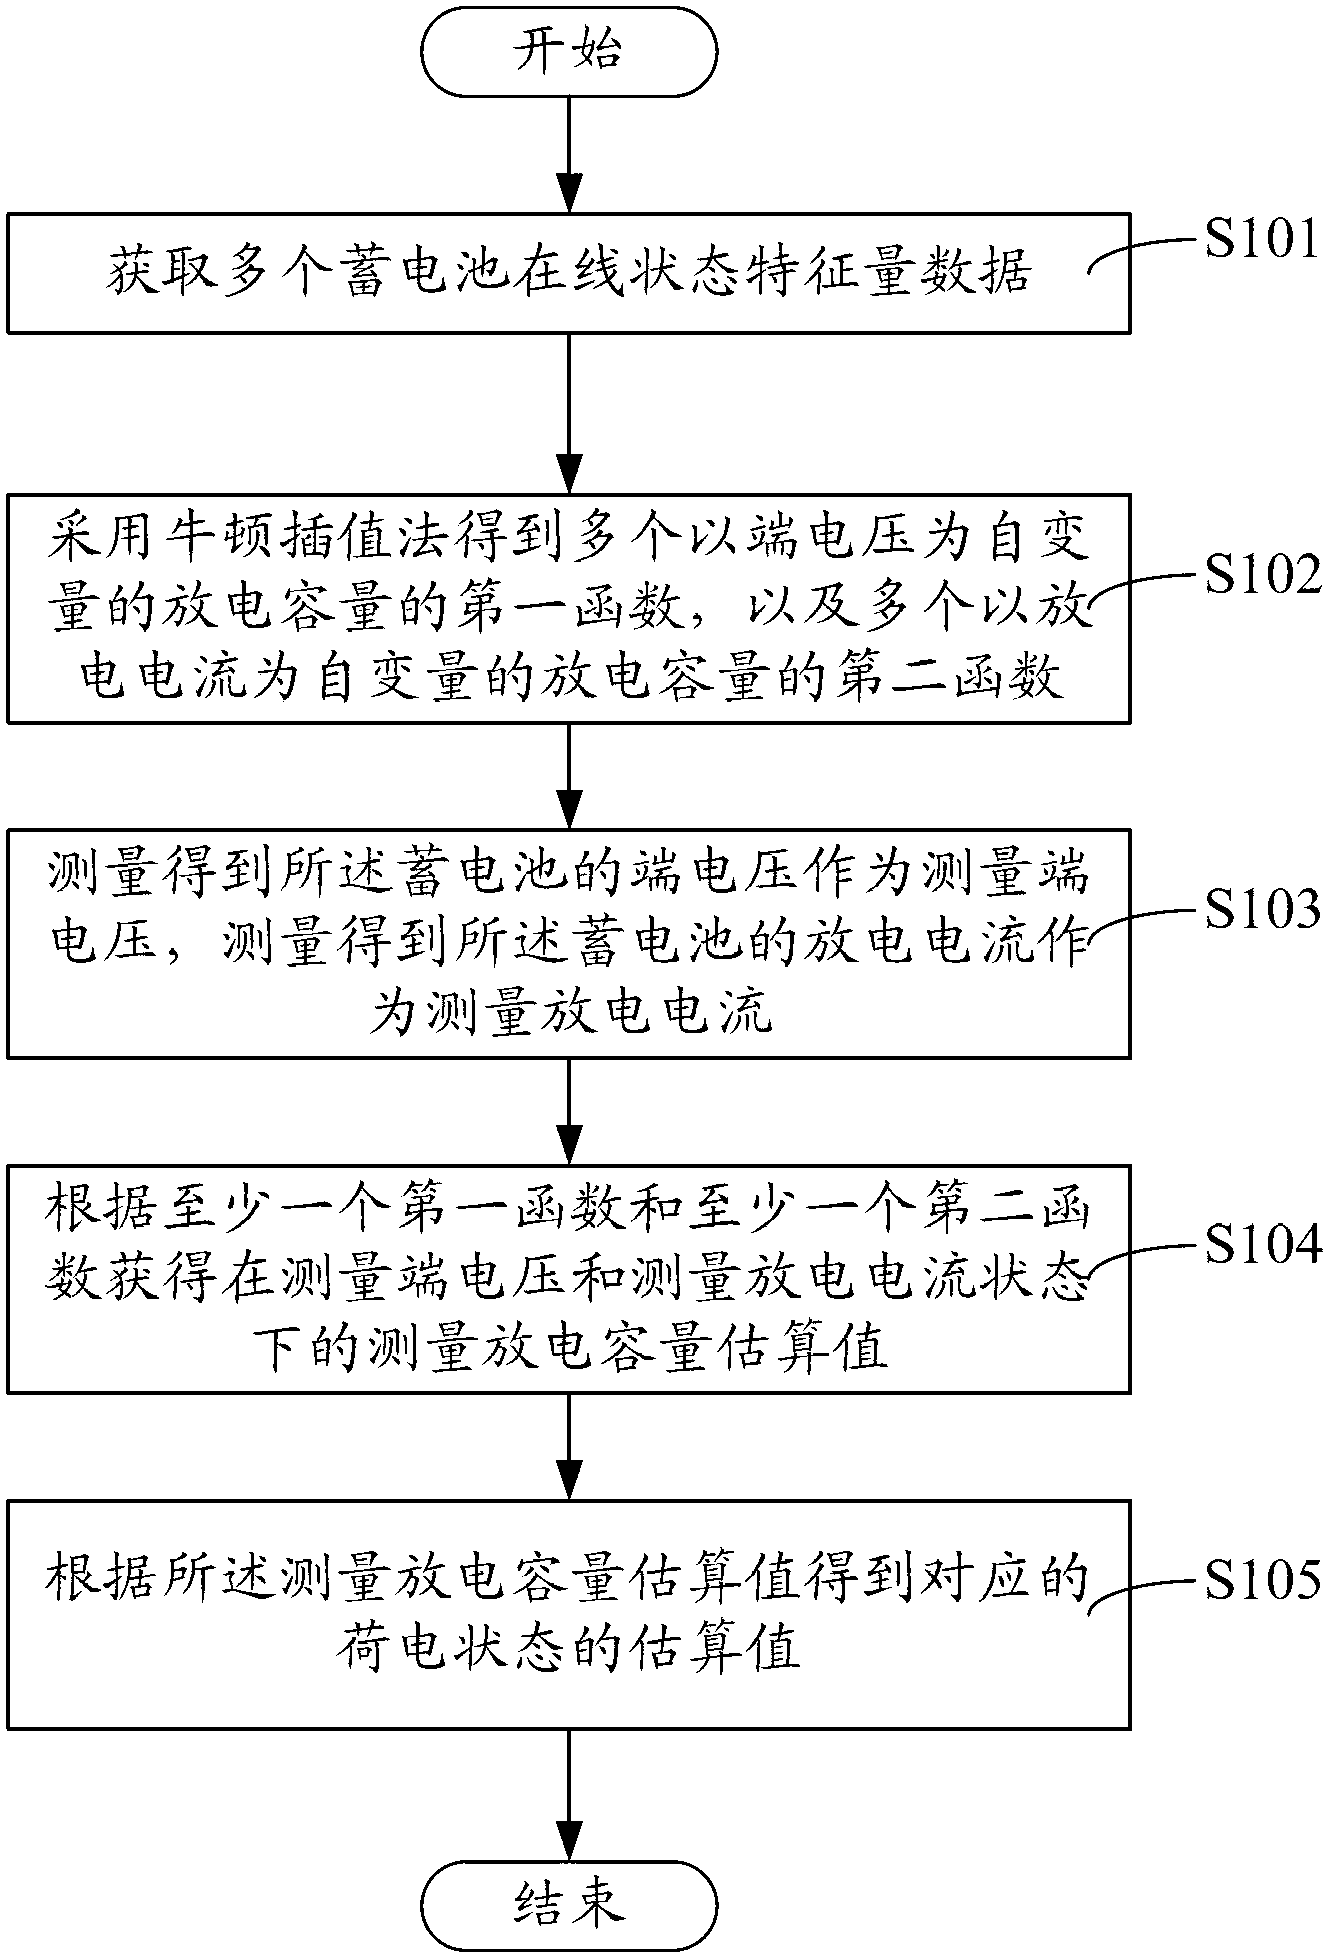 Method and system for estimating charge state of storage battery